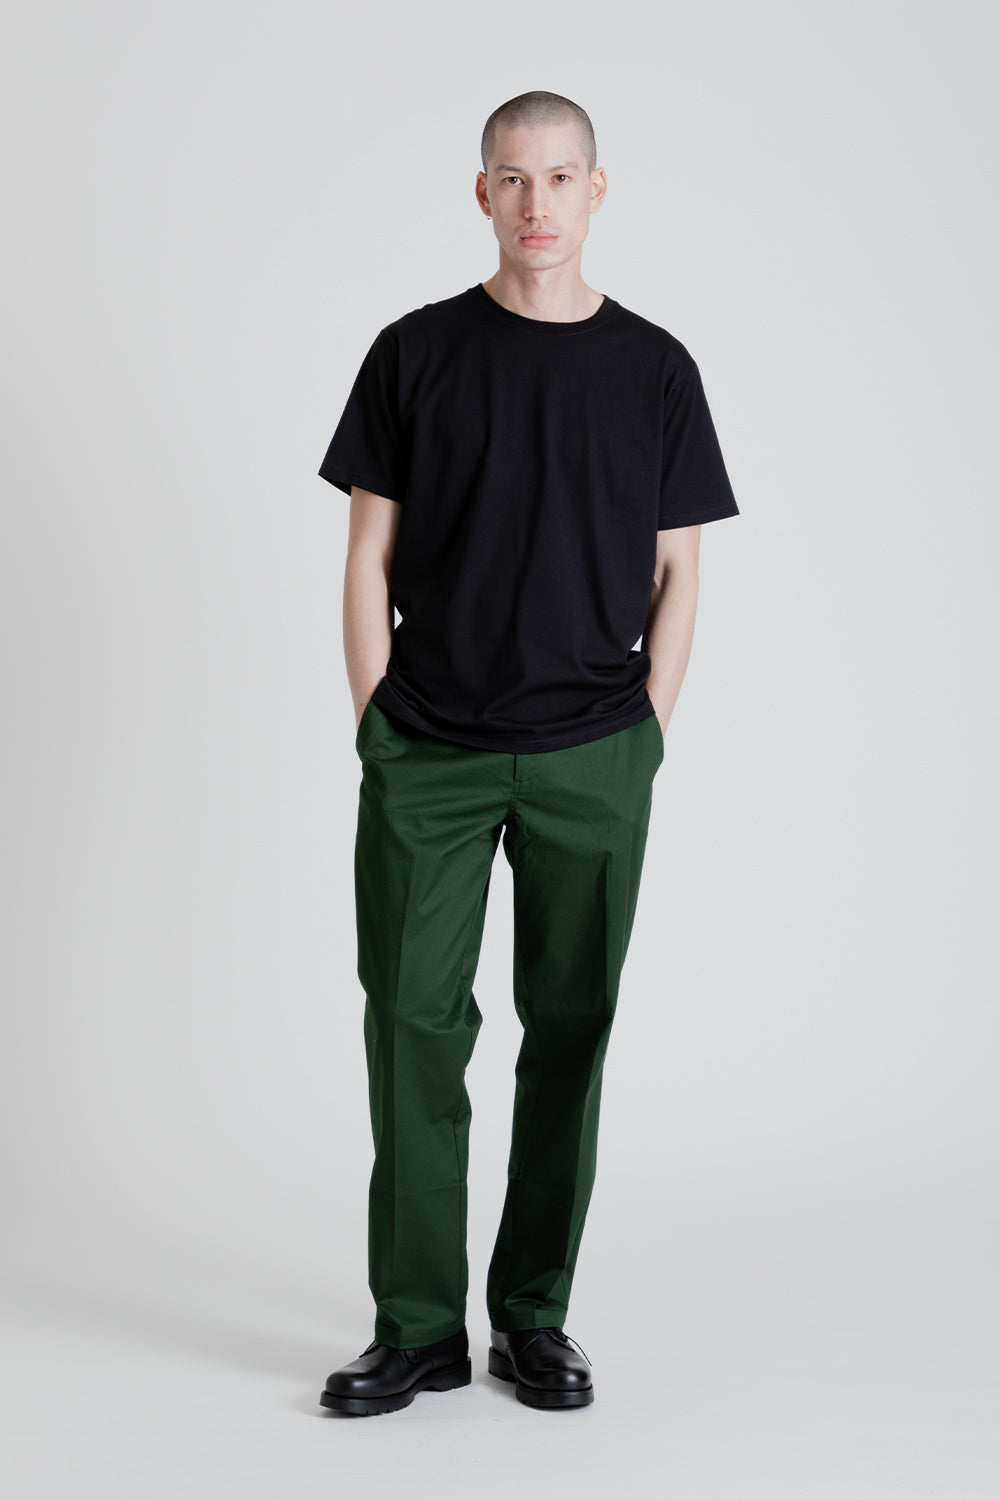 Relaxed Fit Chino Pants - Mountain View